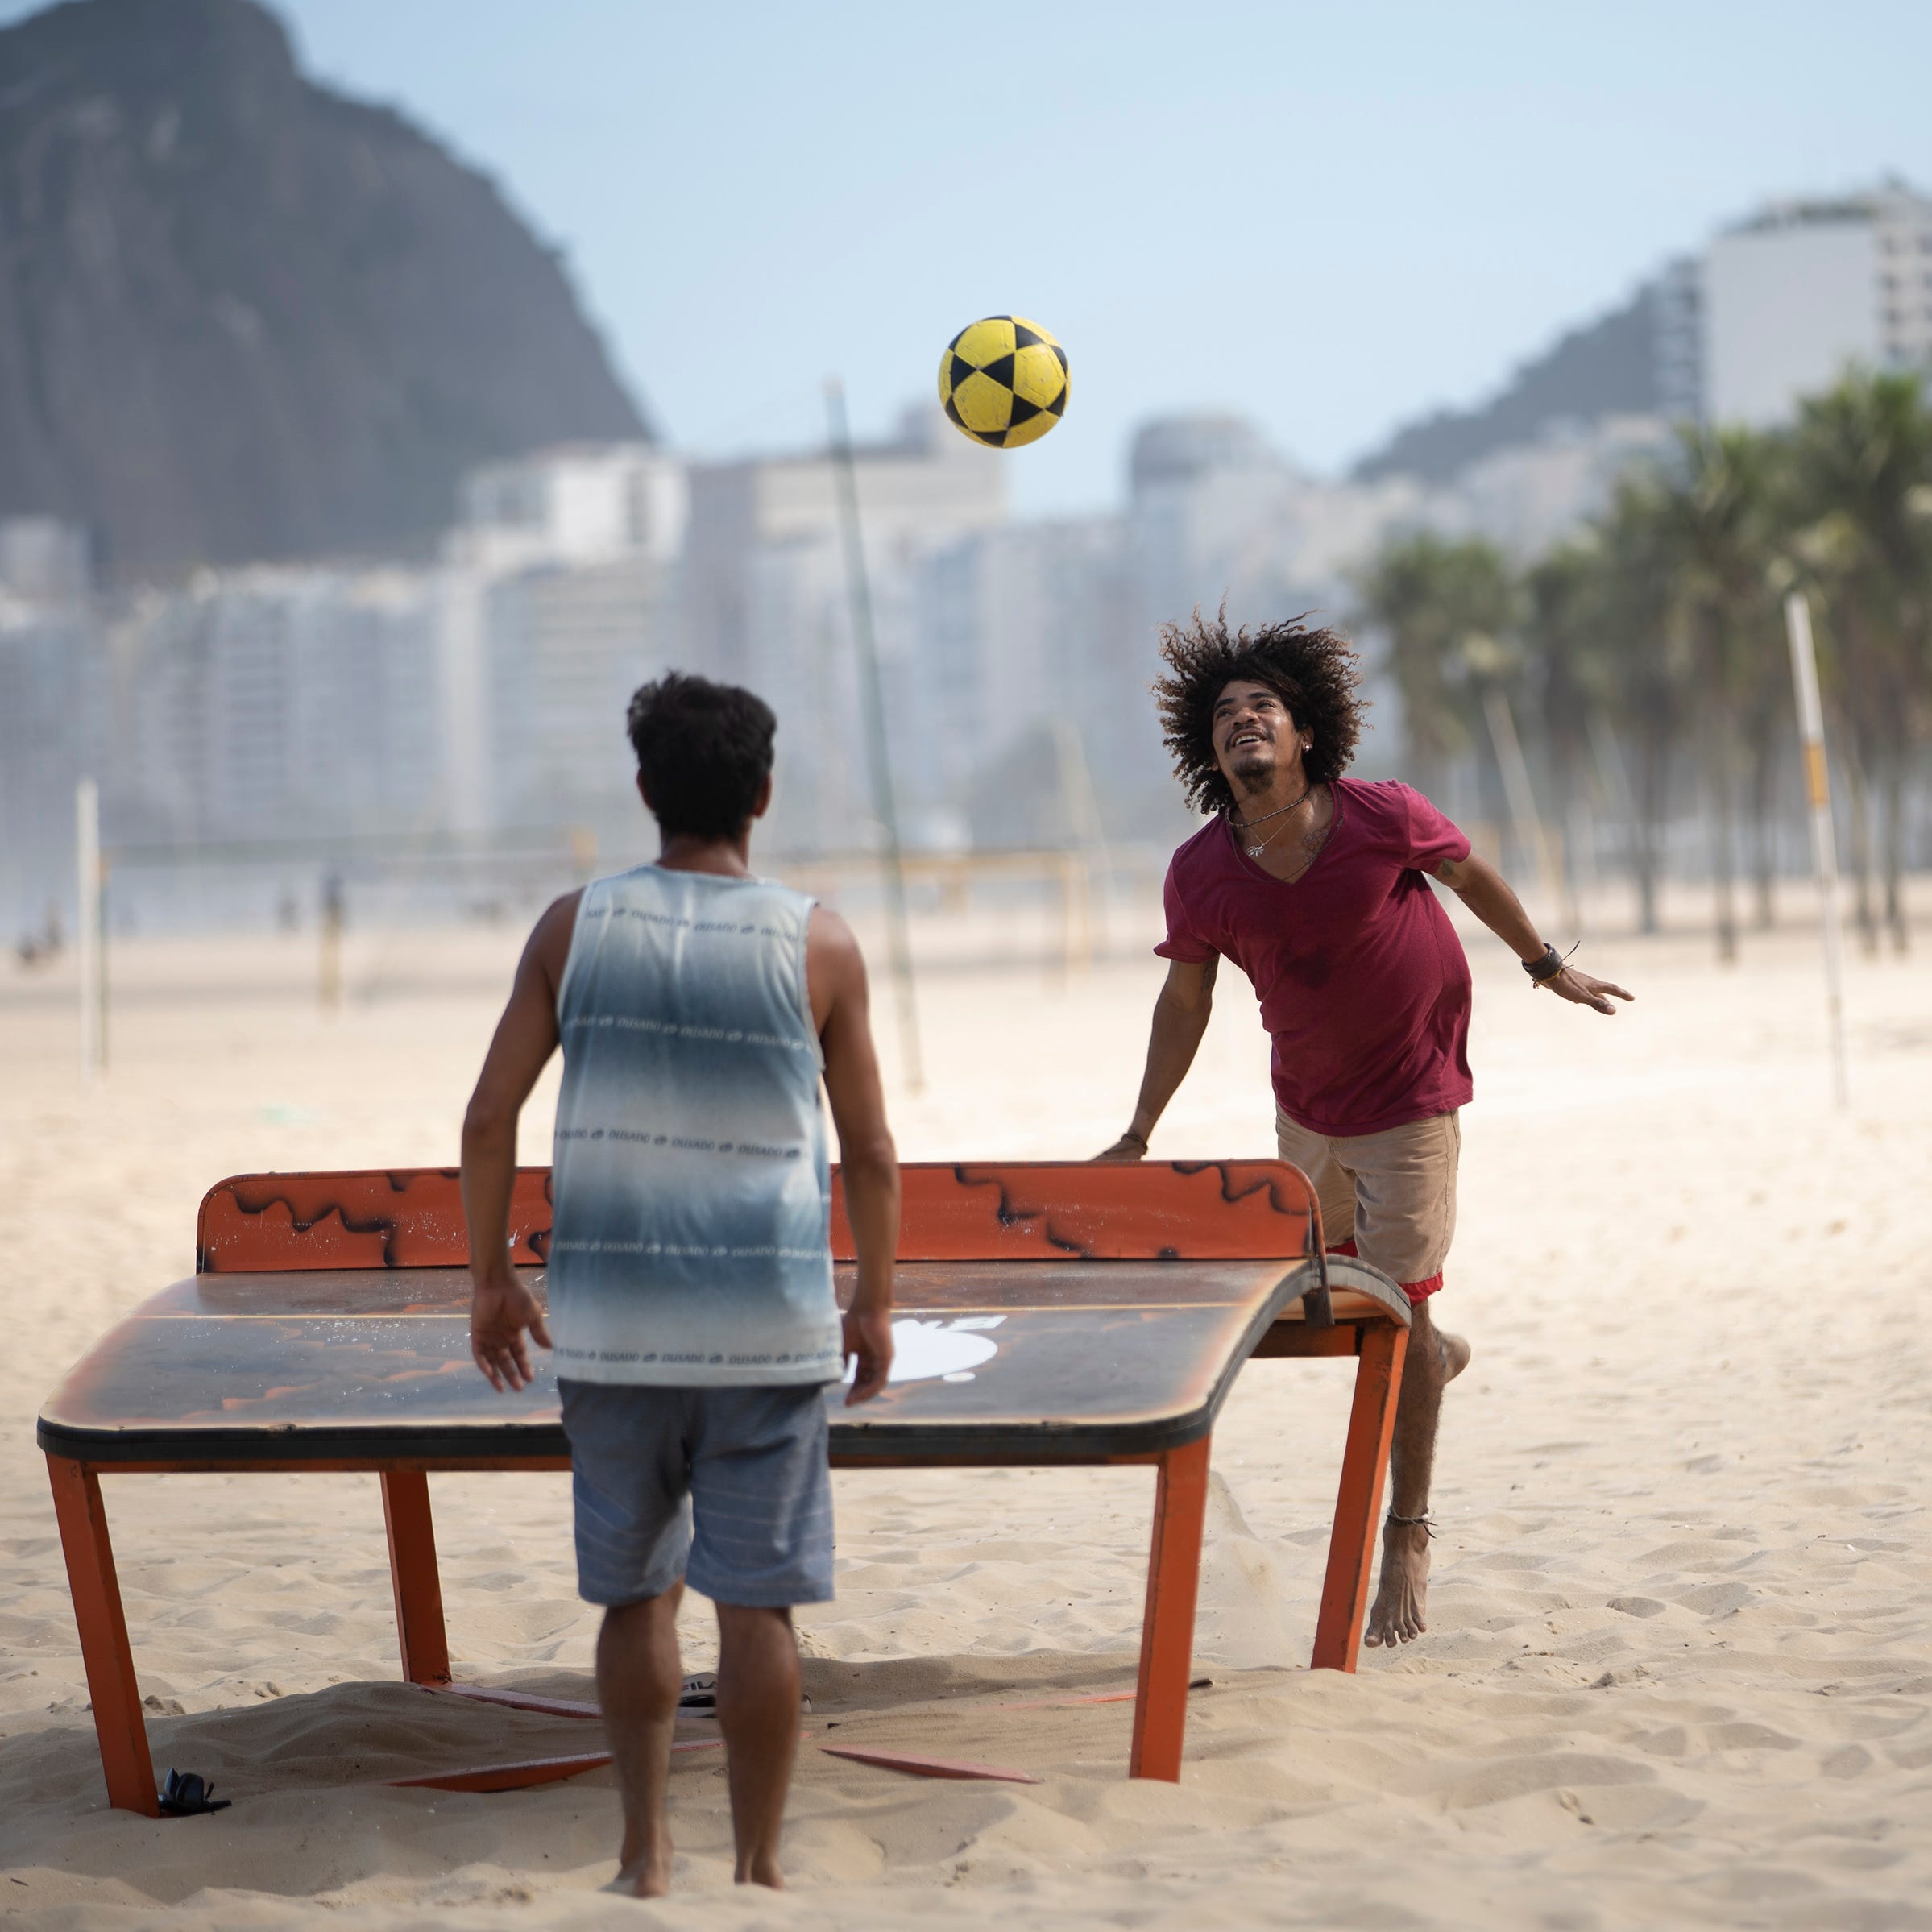 Two men play teqball amid the new coronavirus pandemic on Copacabana beach in Rio de Janeiro, Brazil, Thursday, July 2, 2020, as authorities begin to ease the city's lockdown against the growing COVID-19 pandemic. Teqball is played over a curved table combining elements of soccer and table tennis. 